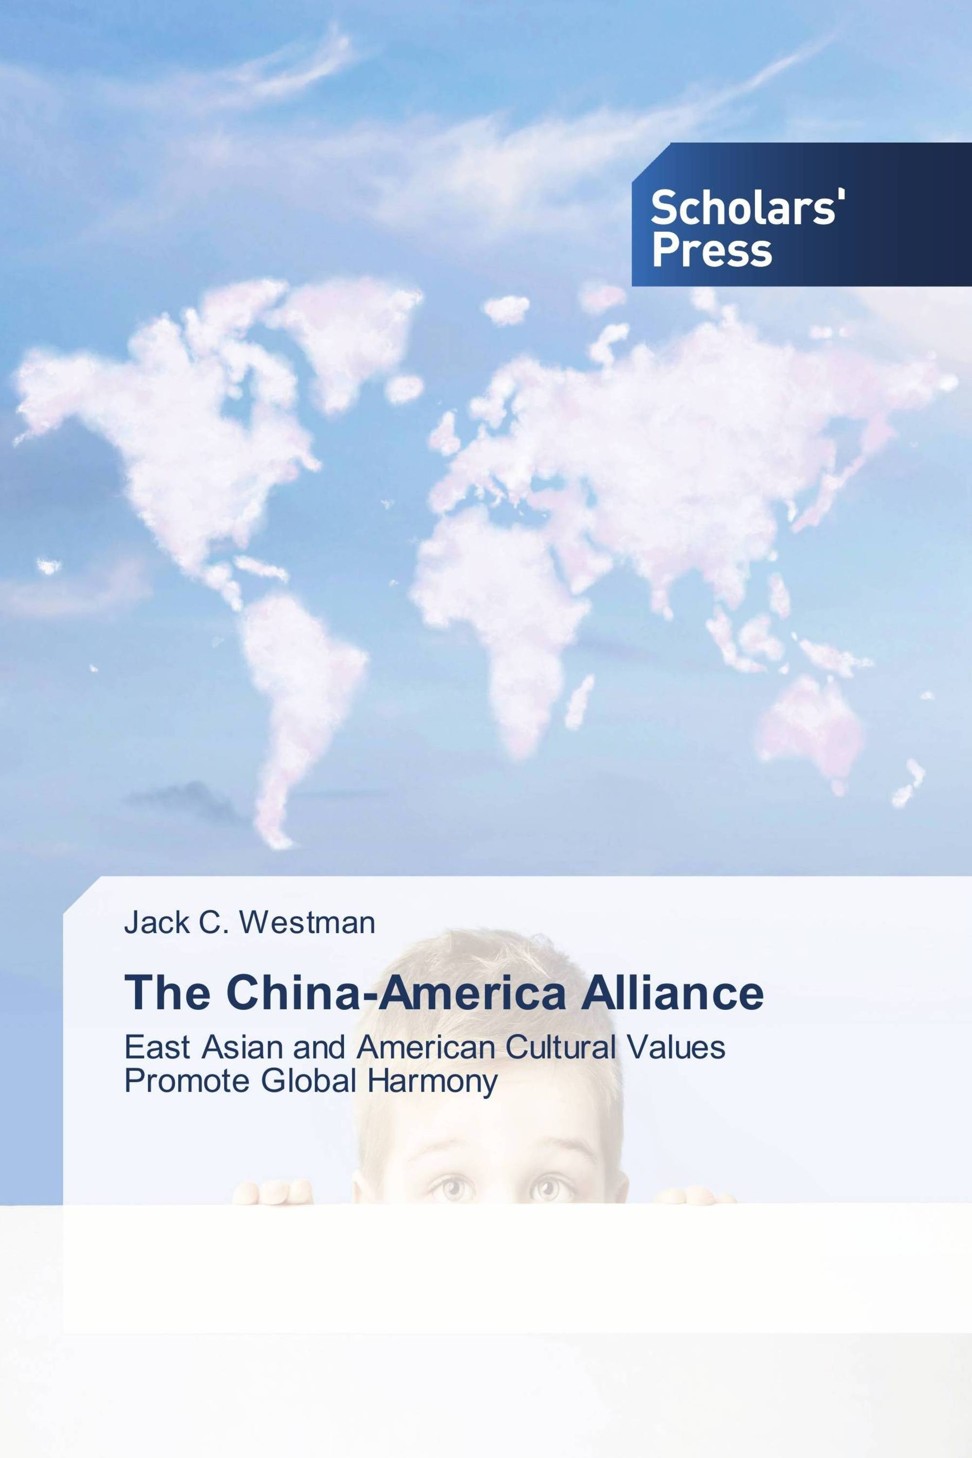 Cover of The China-America Alliance by Jack Westman.